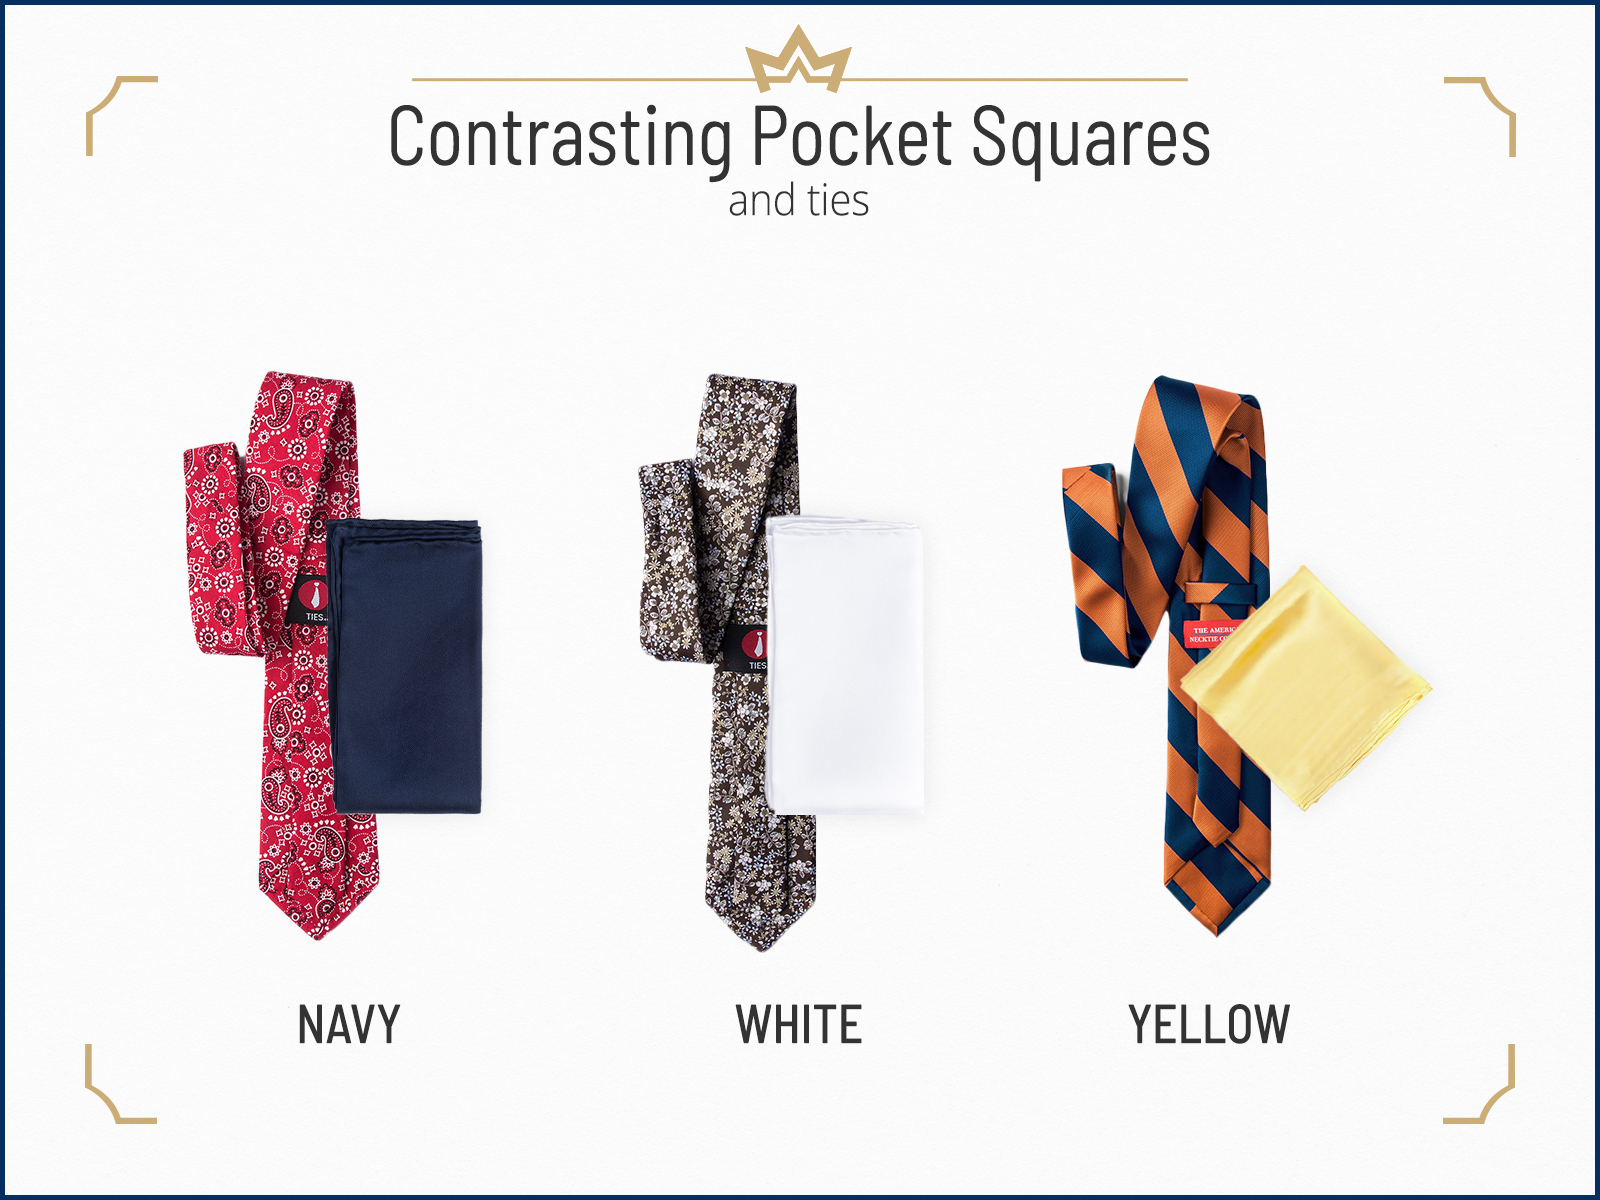 matching contrasting pocket squares and ties